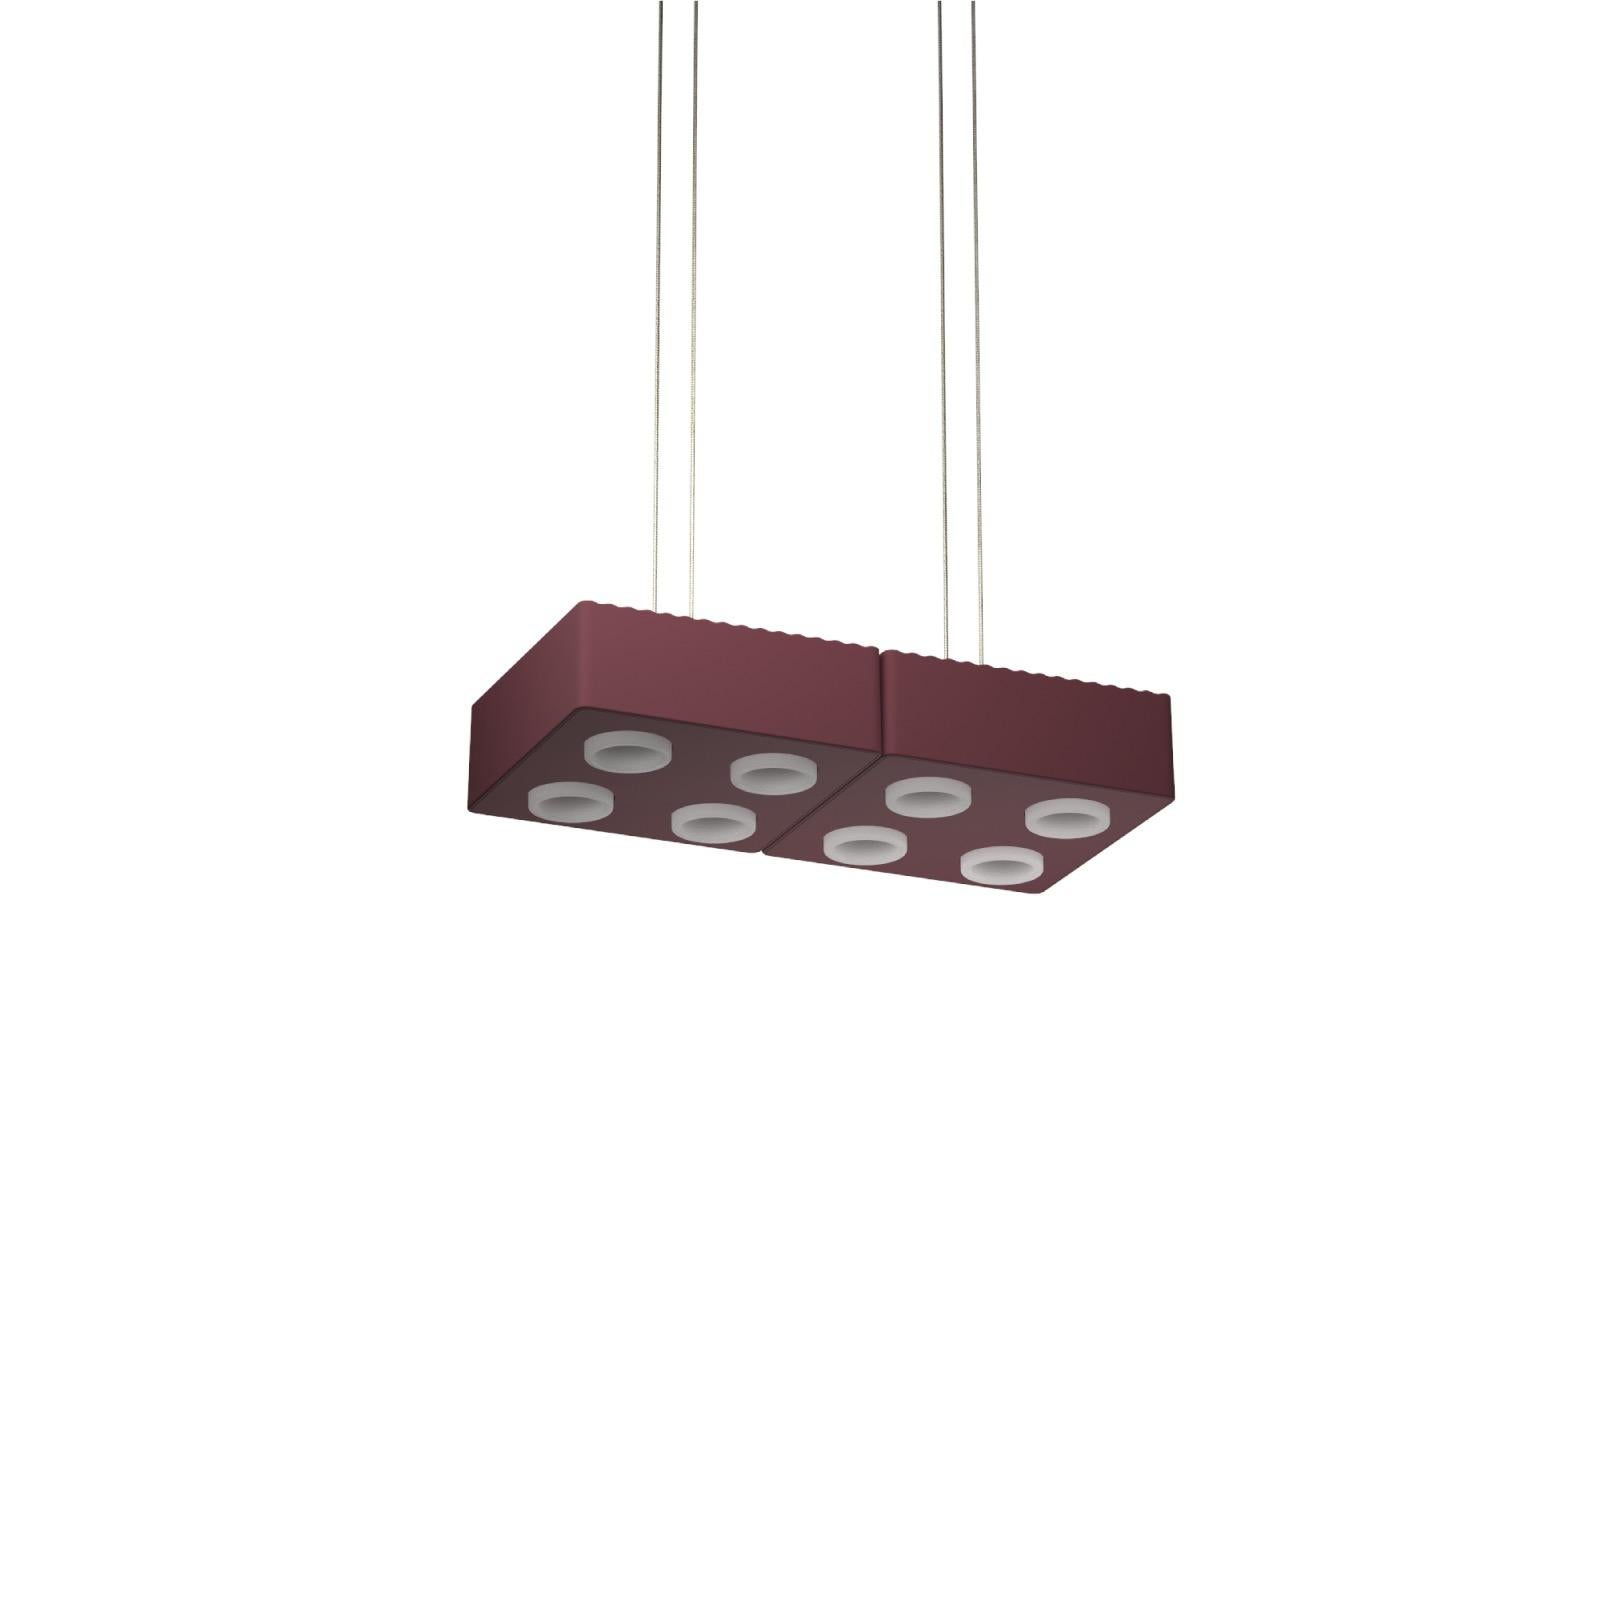 Domino Pendant lamp by Sylvain Willenz x AGO Lighting
Burgundy - Double Pendant Lamp

Materials: Aluminum 
Light Source: Integrated LED (COB), DC
Watt. 30 W (15W x 2)
Color temp. 2700 / 3000K
Cable Length: 3m 

Available colors:
Charcoal,